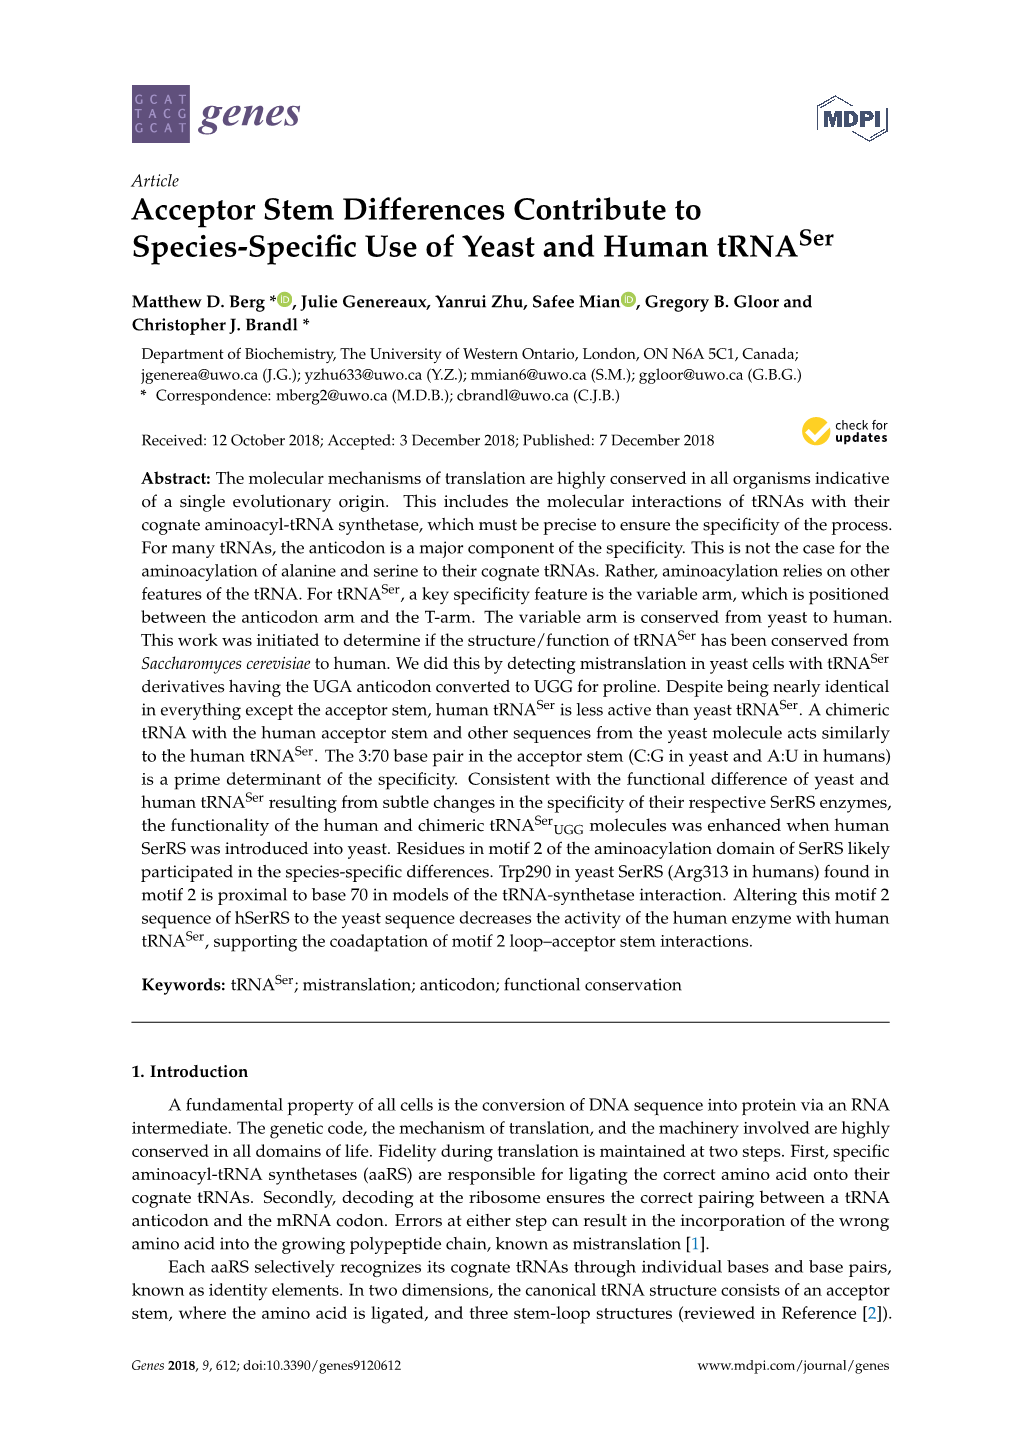 Acceptor Stem Differences Contribute to Species-Specific Use of Yeast